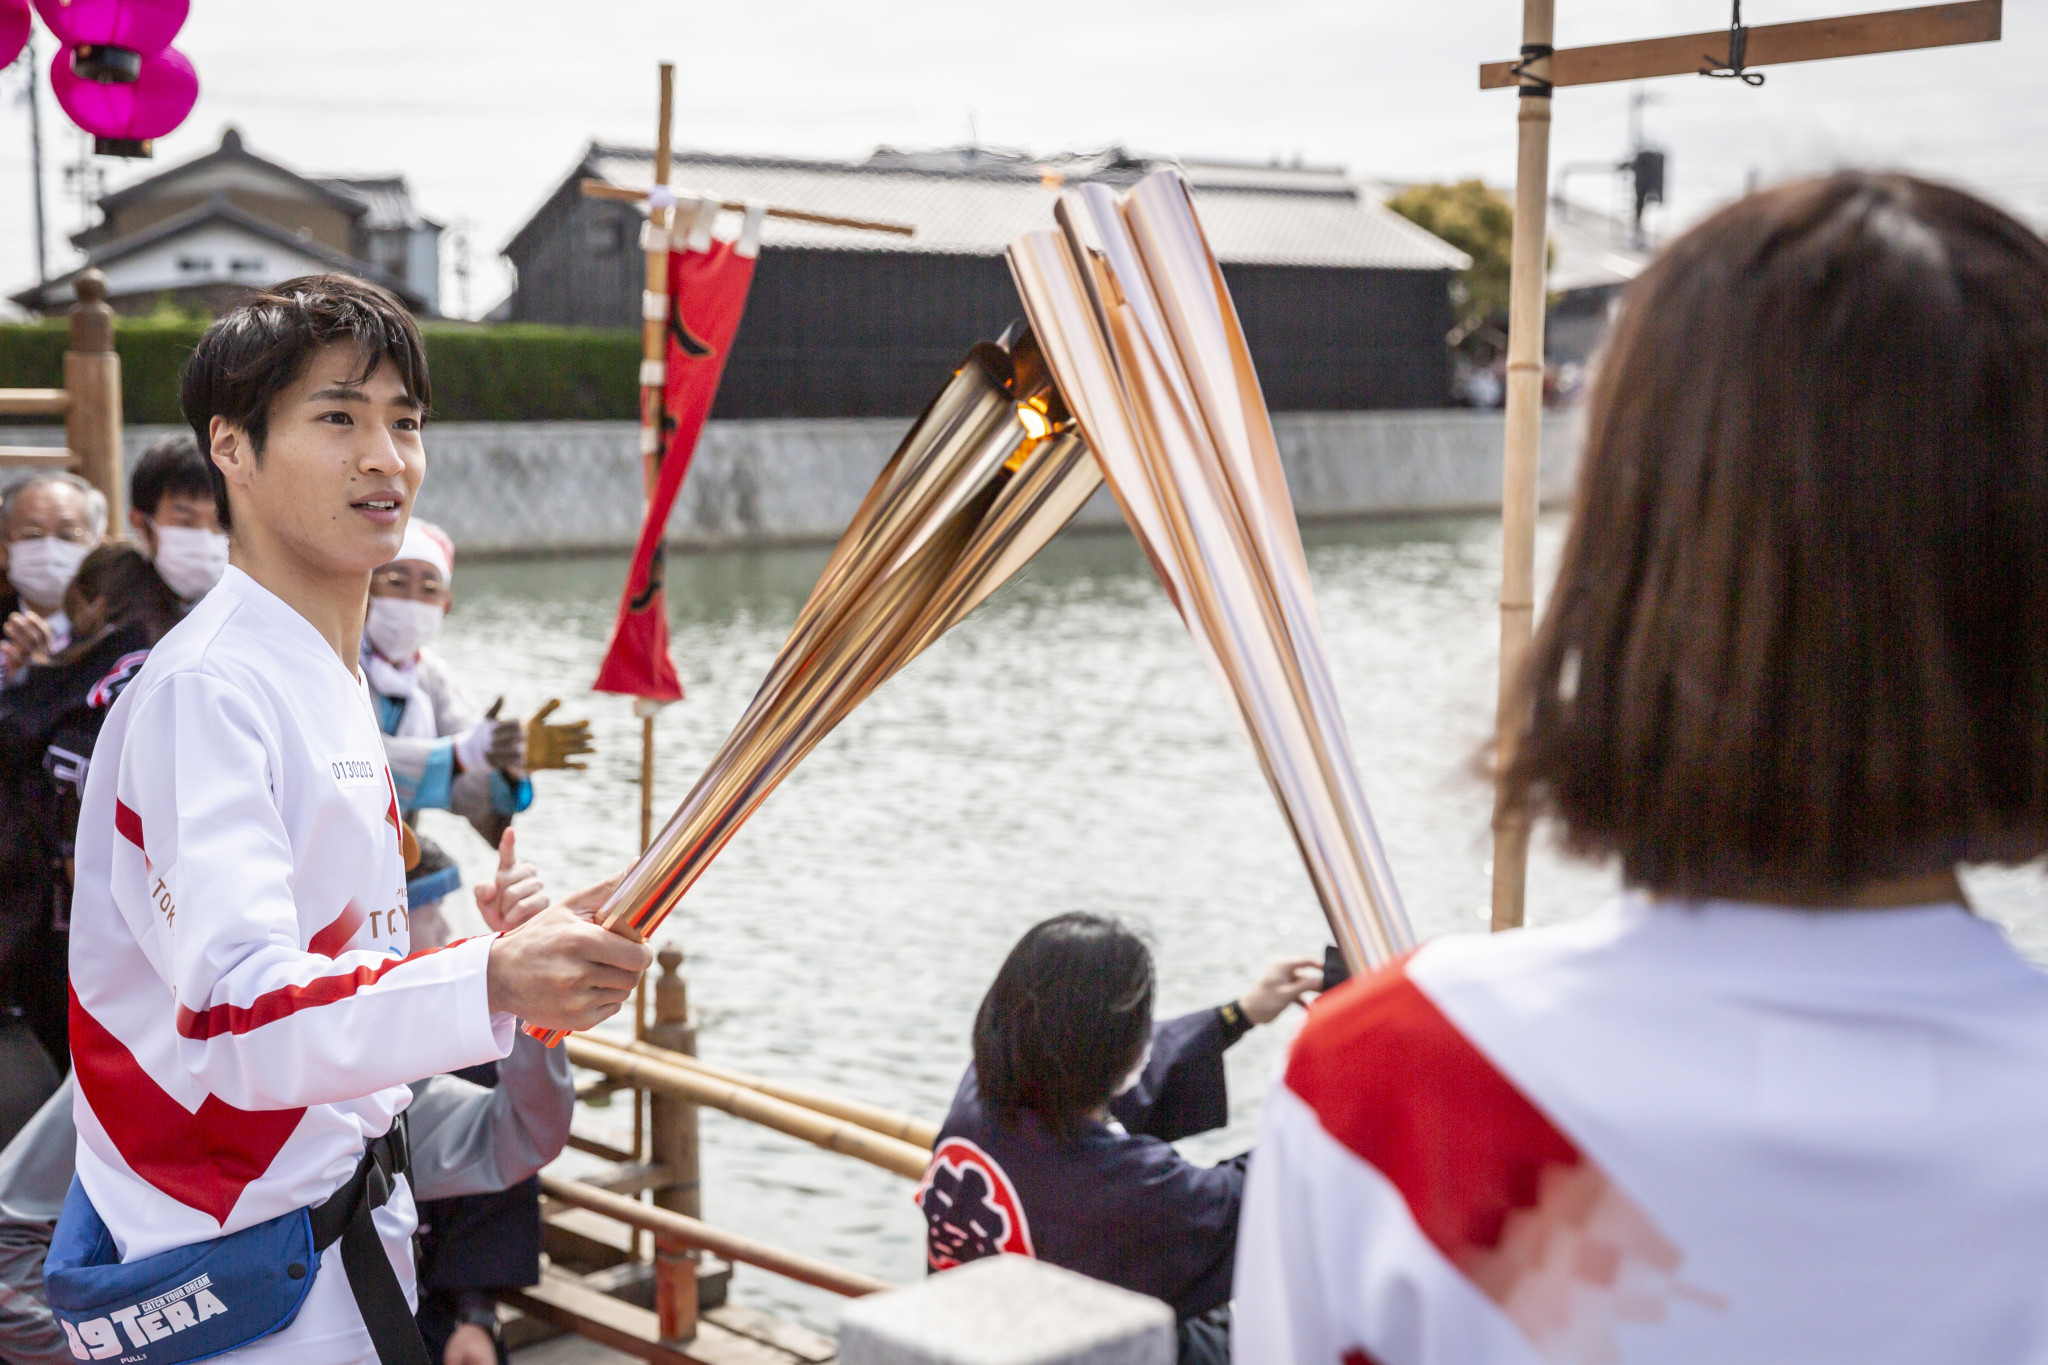 First COVID-19 case linked to Torch Relay, Tokyo 2020 organisers confirm